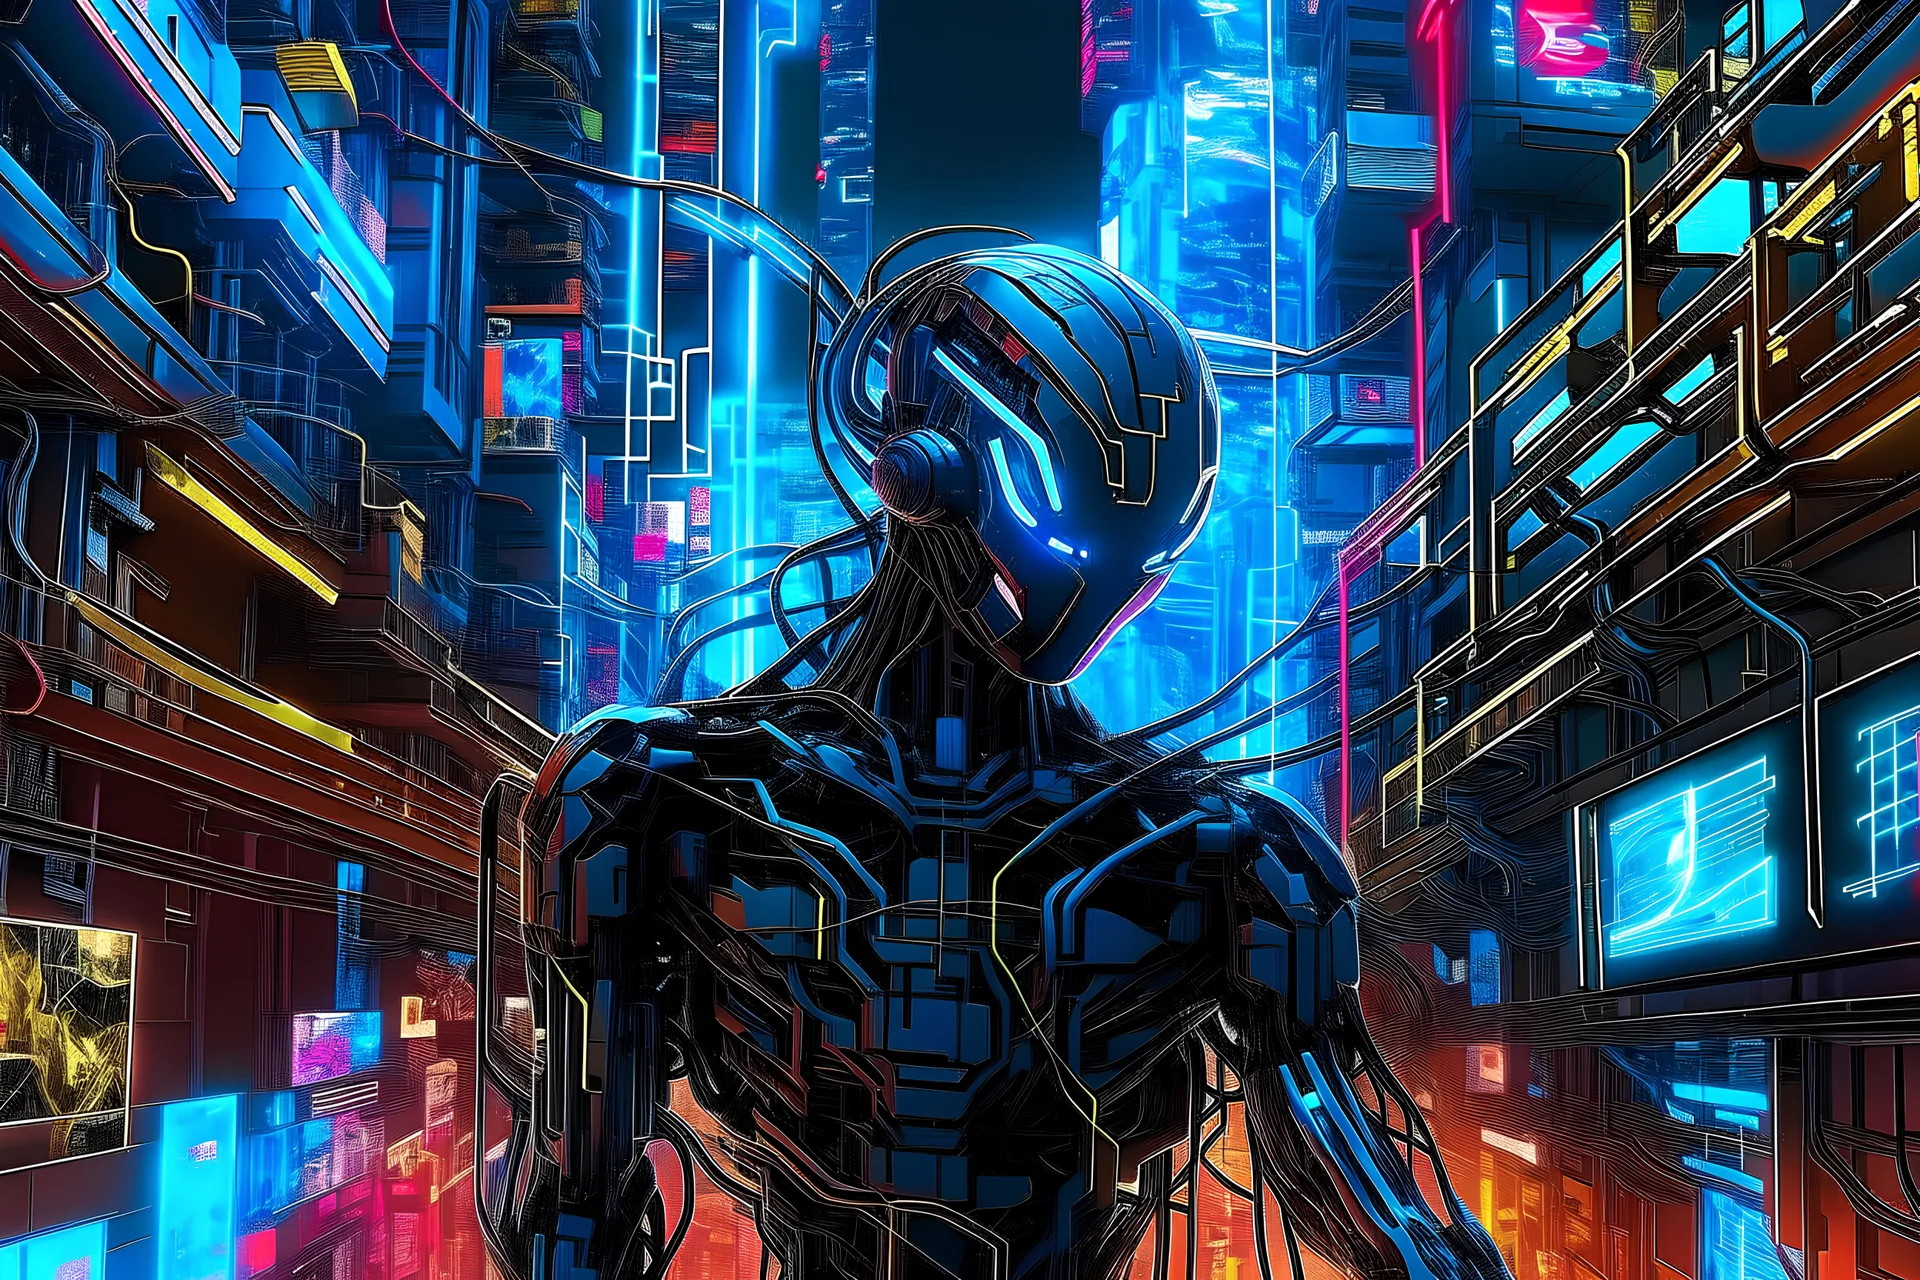 Poster of piercing AI entity bursting out of a wall of wires and technology. The art style is modern cyberpunk with a neon-lit cityscape background. 3d render